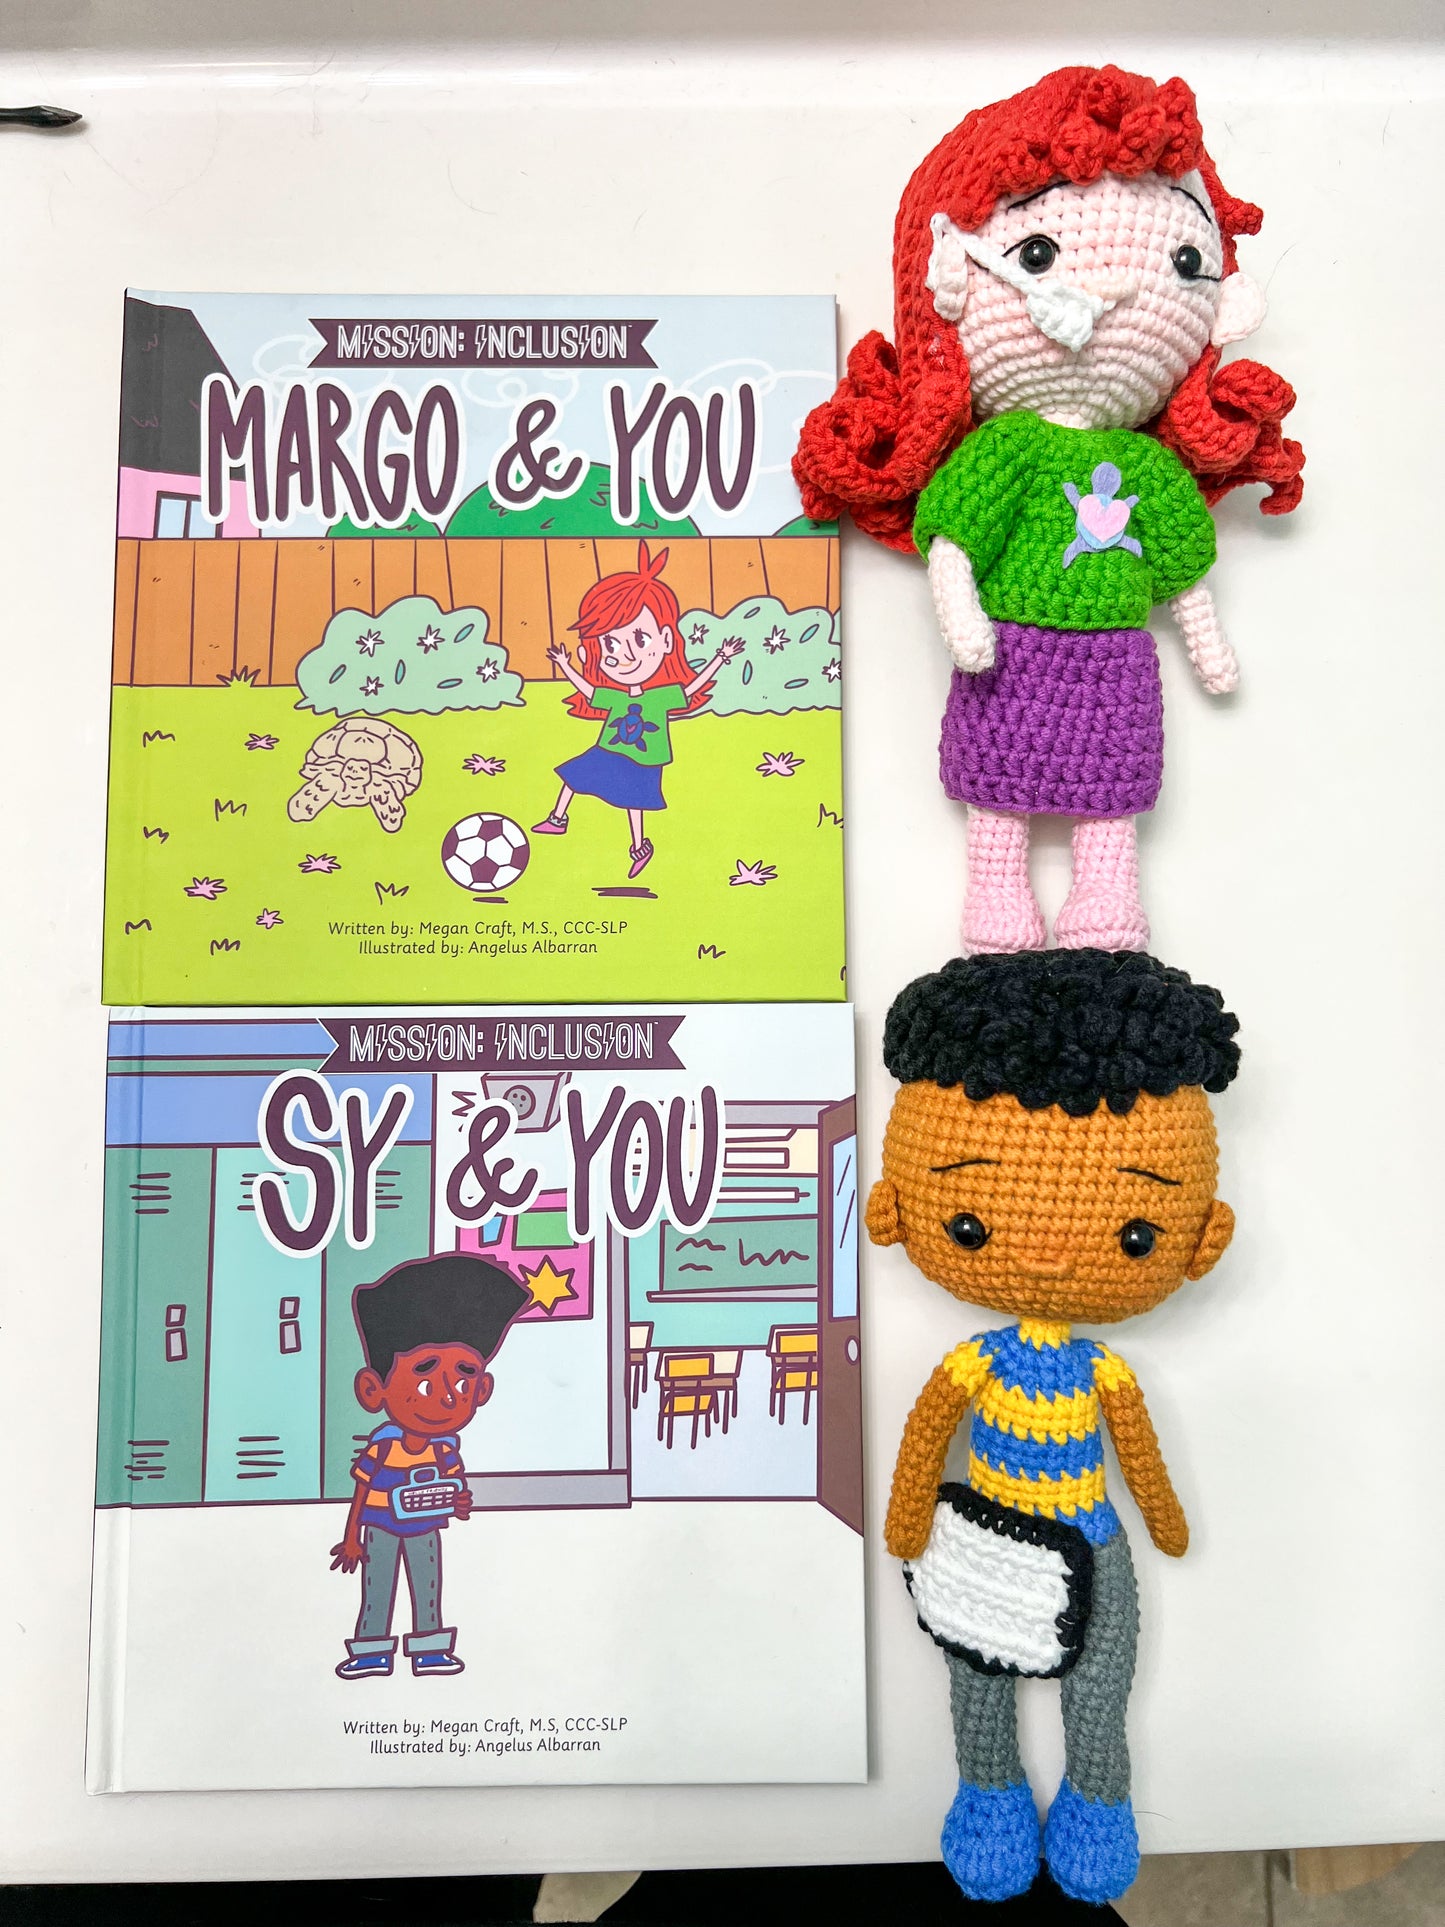 Margo and Sy Books paired with Dolls